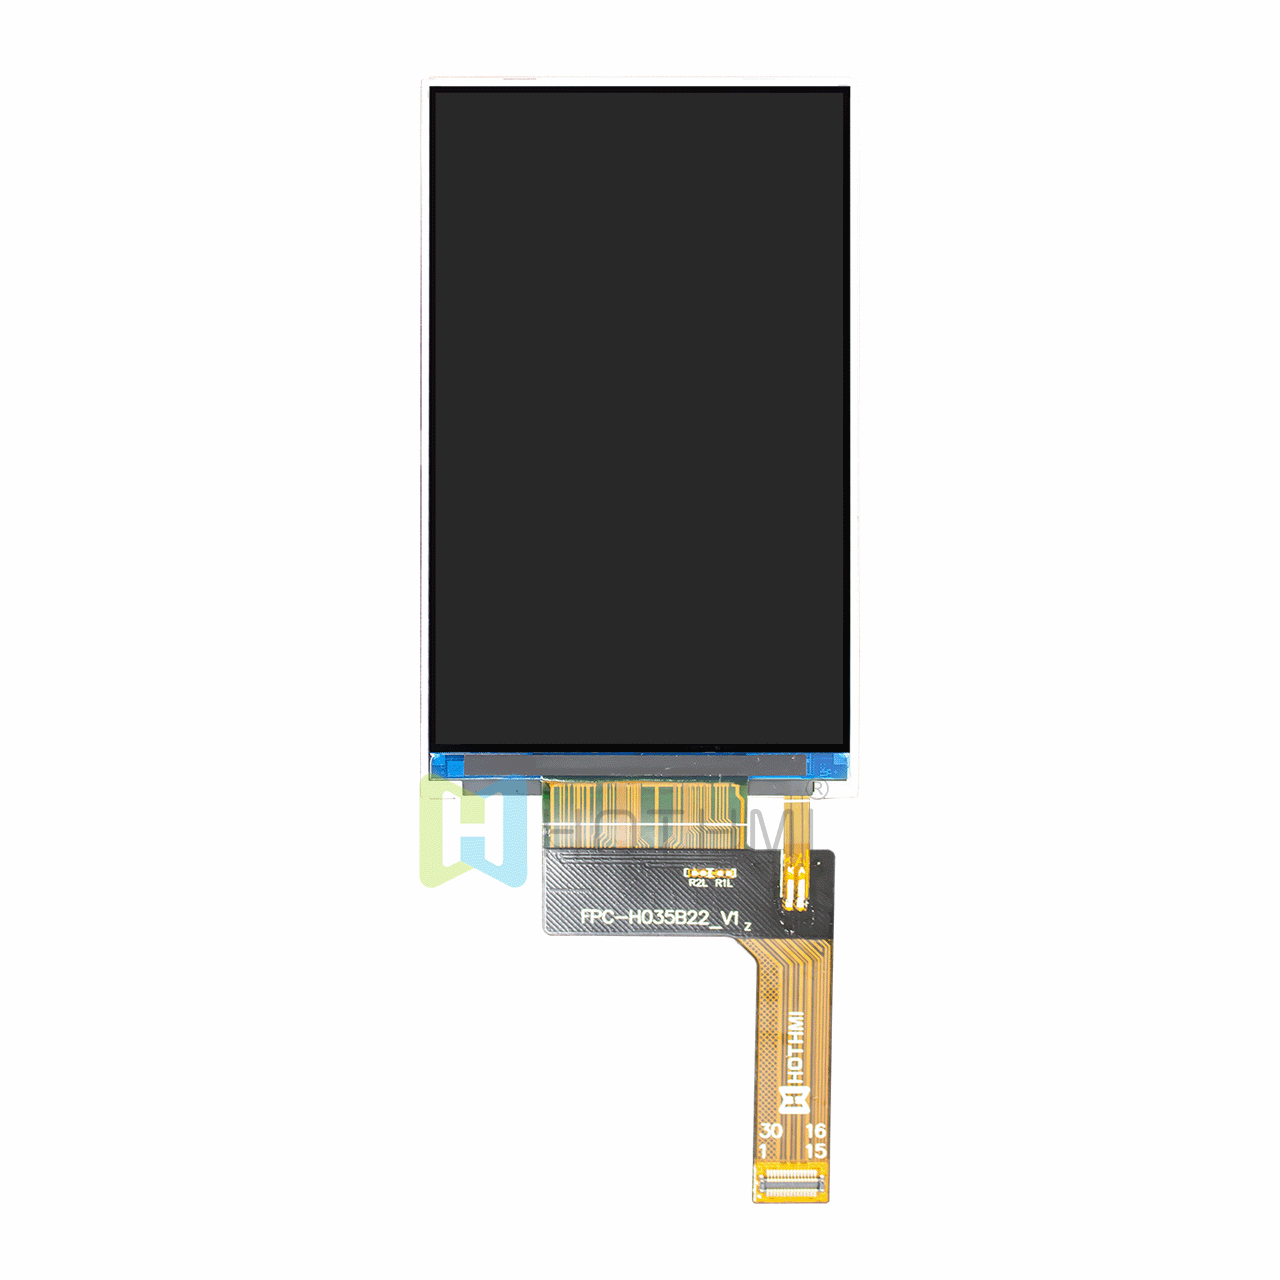 3.5-inch IPS TFT LCD module/480x800 dot matrix/ST7701S/MIPI interface/visible under sunlight/3.3V/compatible with Android